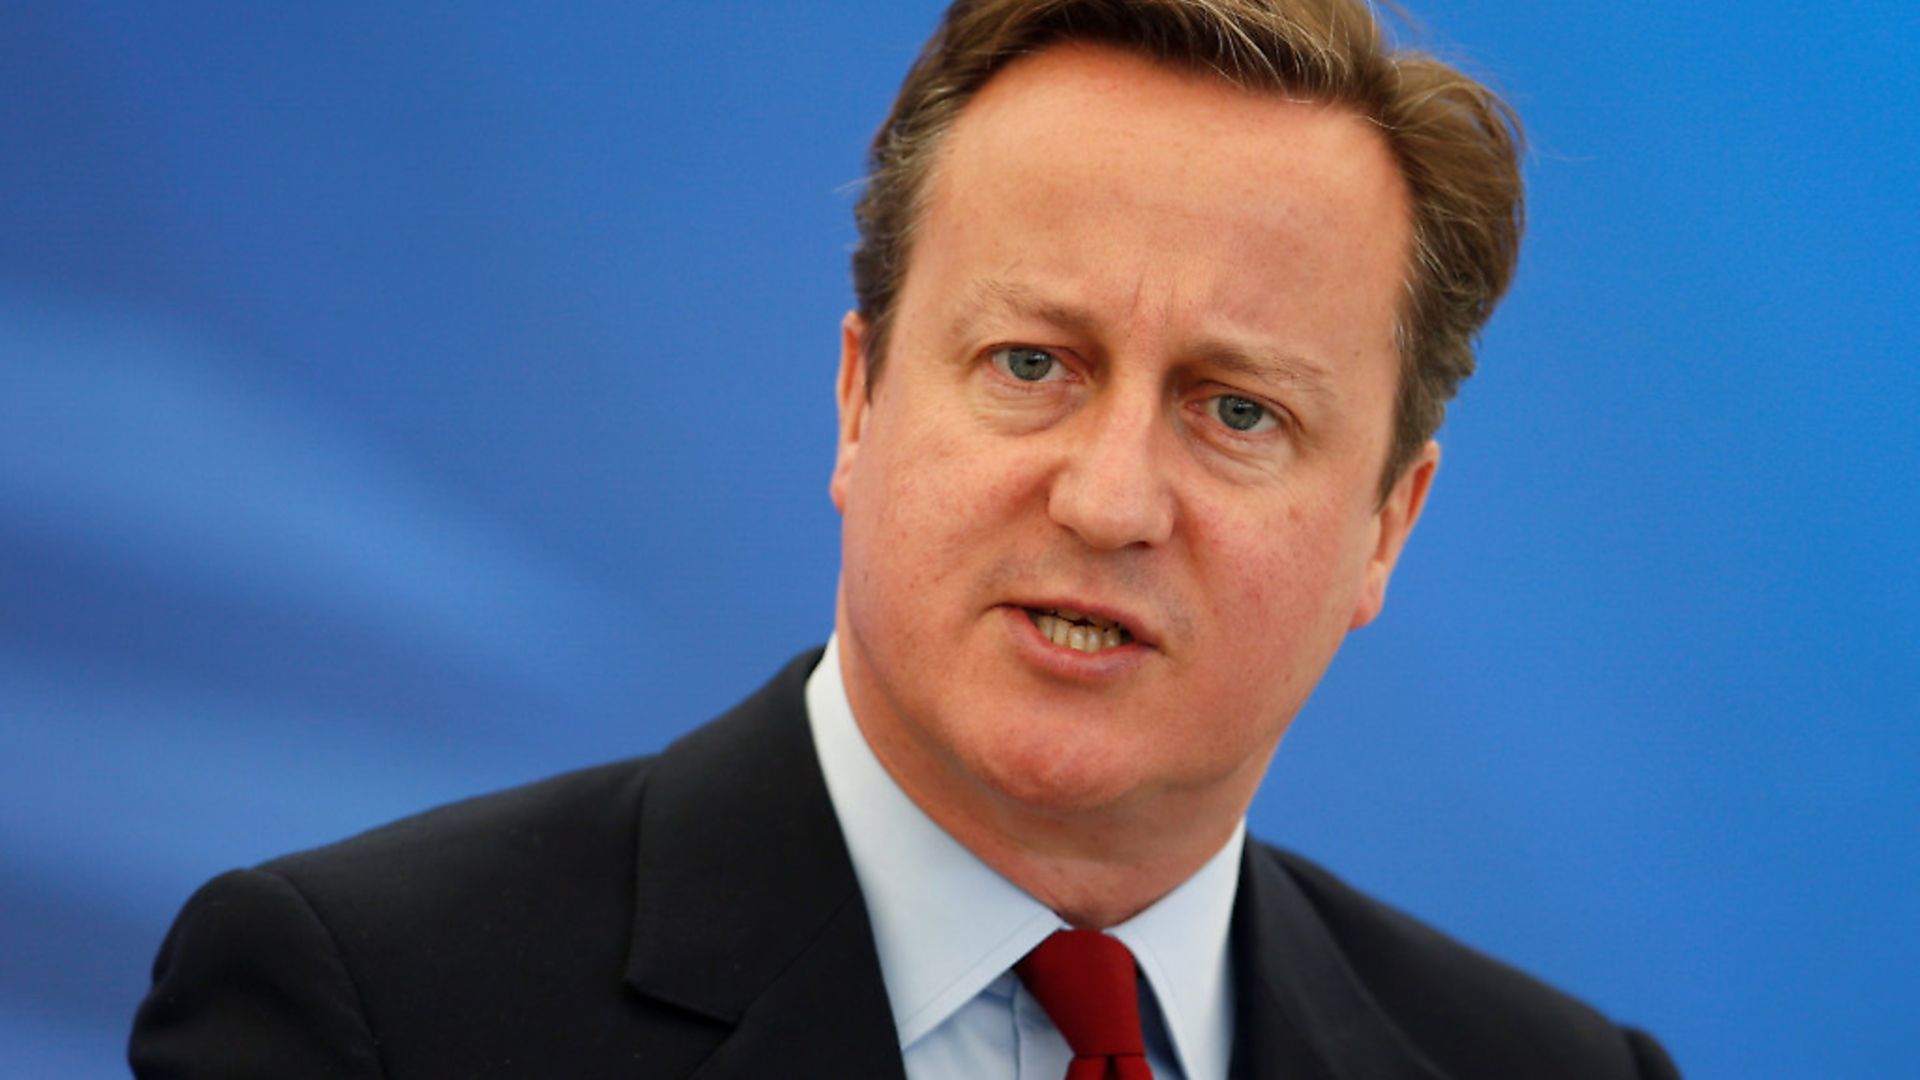 Former British prime minister David Cameron. Picture: Peter Nicholls - WPA Pool /Getty Images - Credit: Getty Images